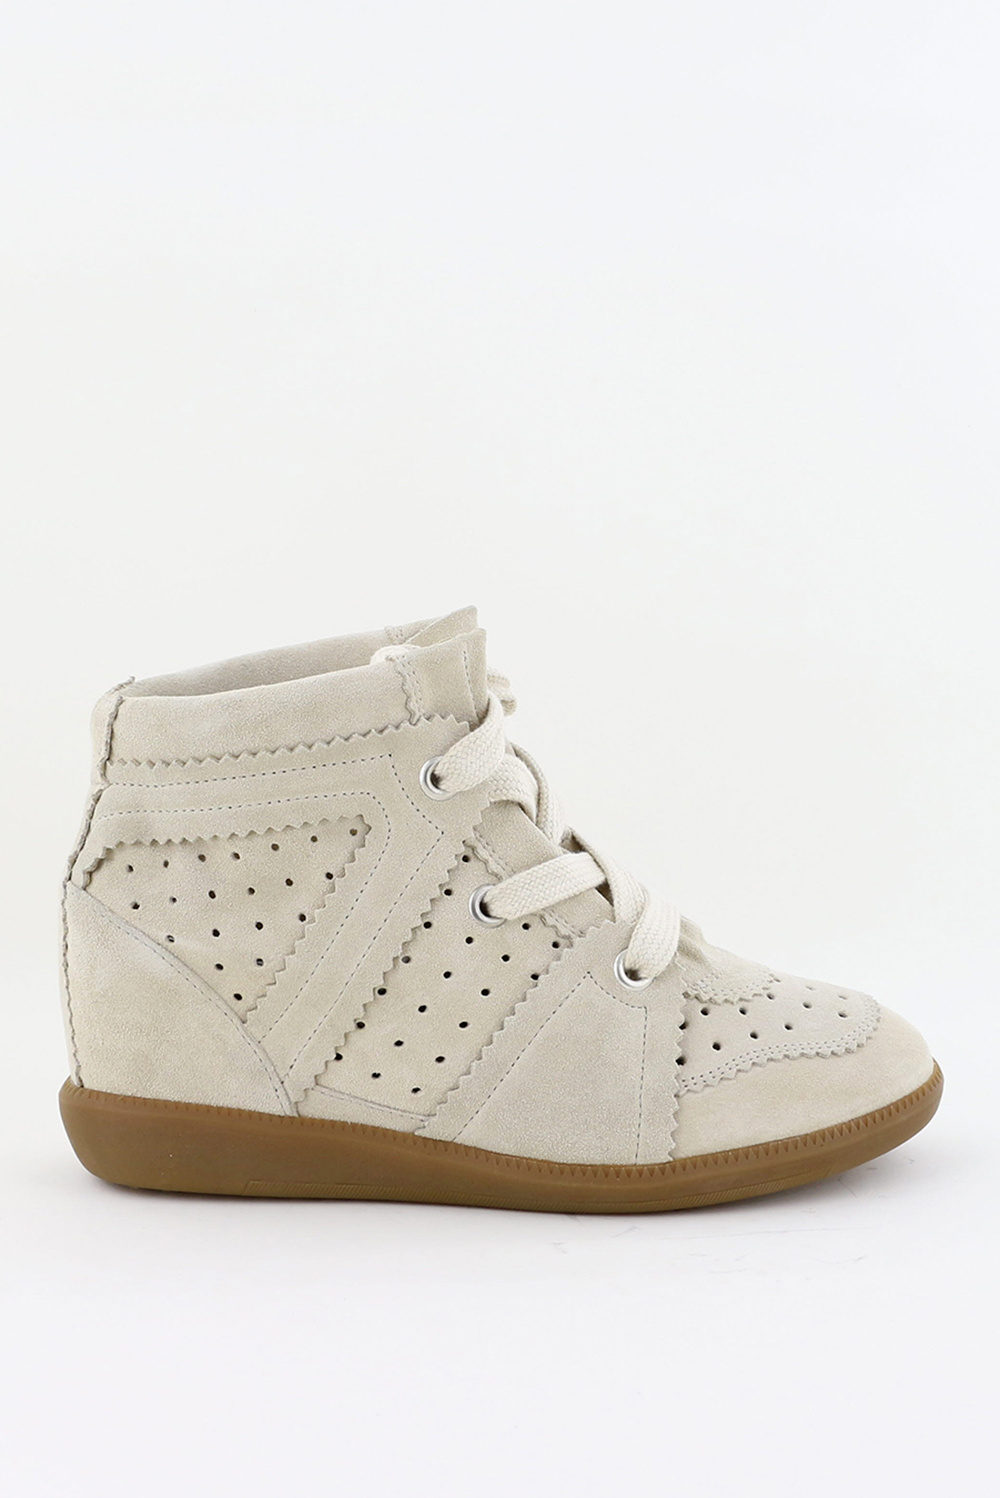 Voldoen browser verdund Isabel Marant sneakers Bobby BK0011FA-A1E20S chalk - Marjon Snieders